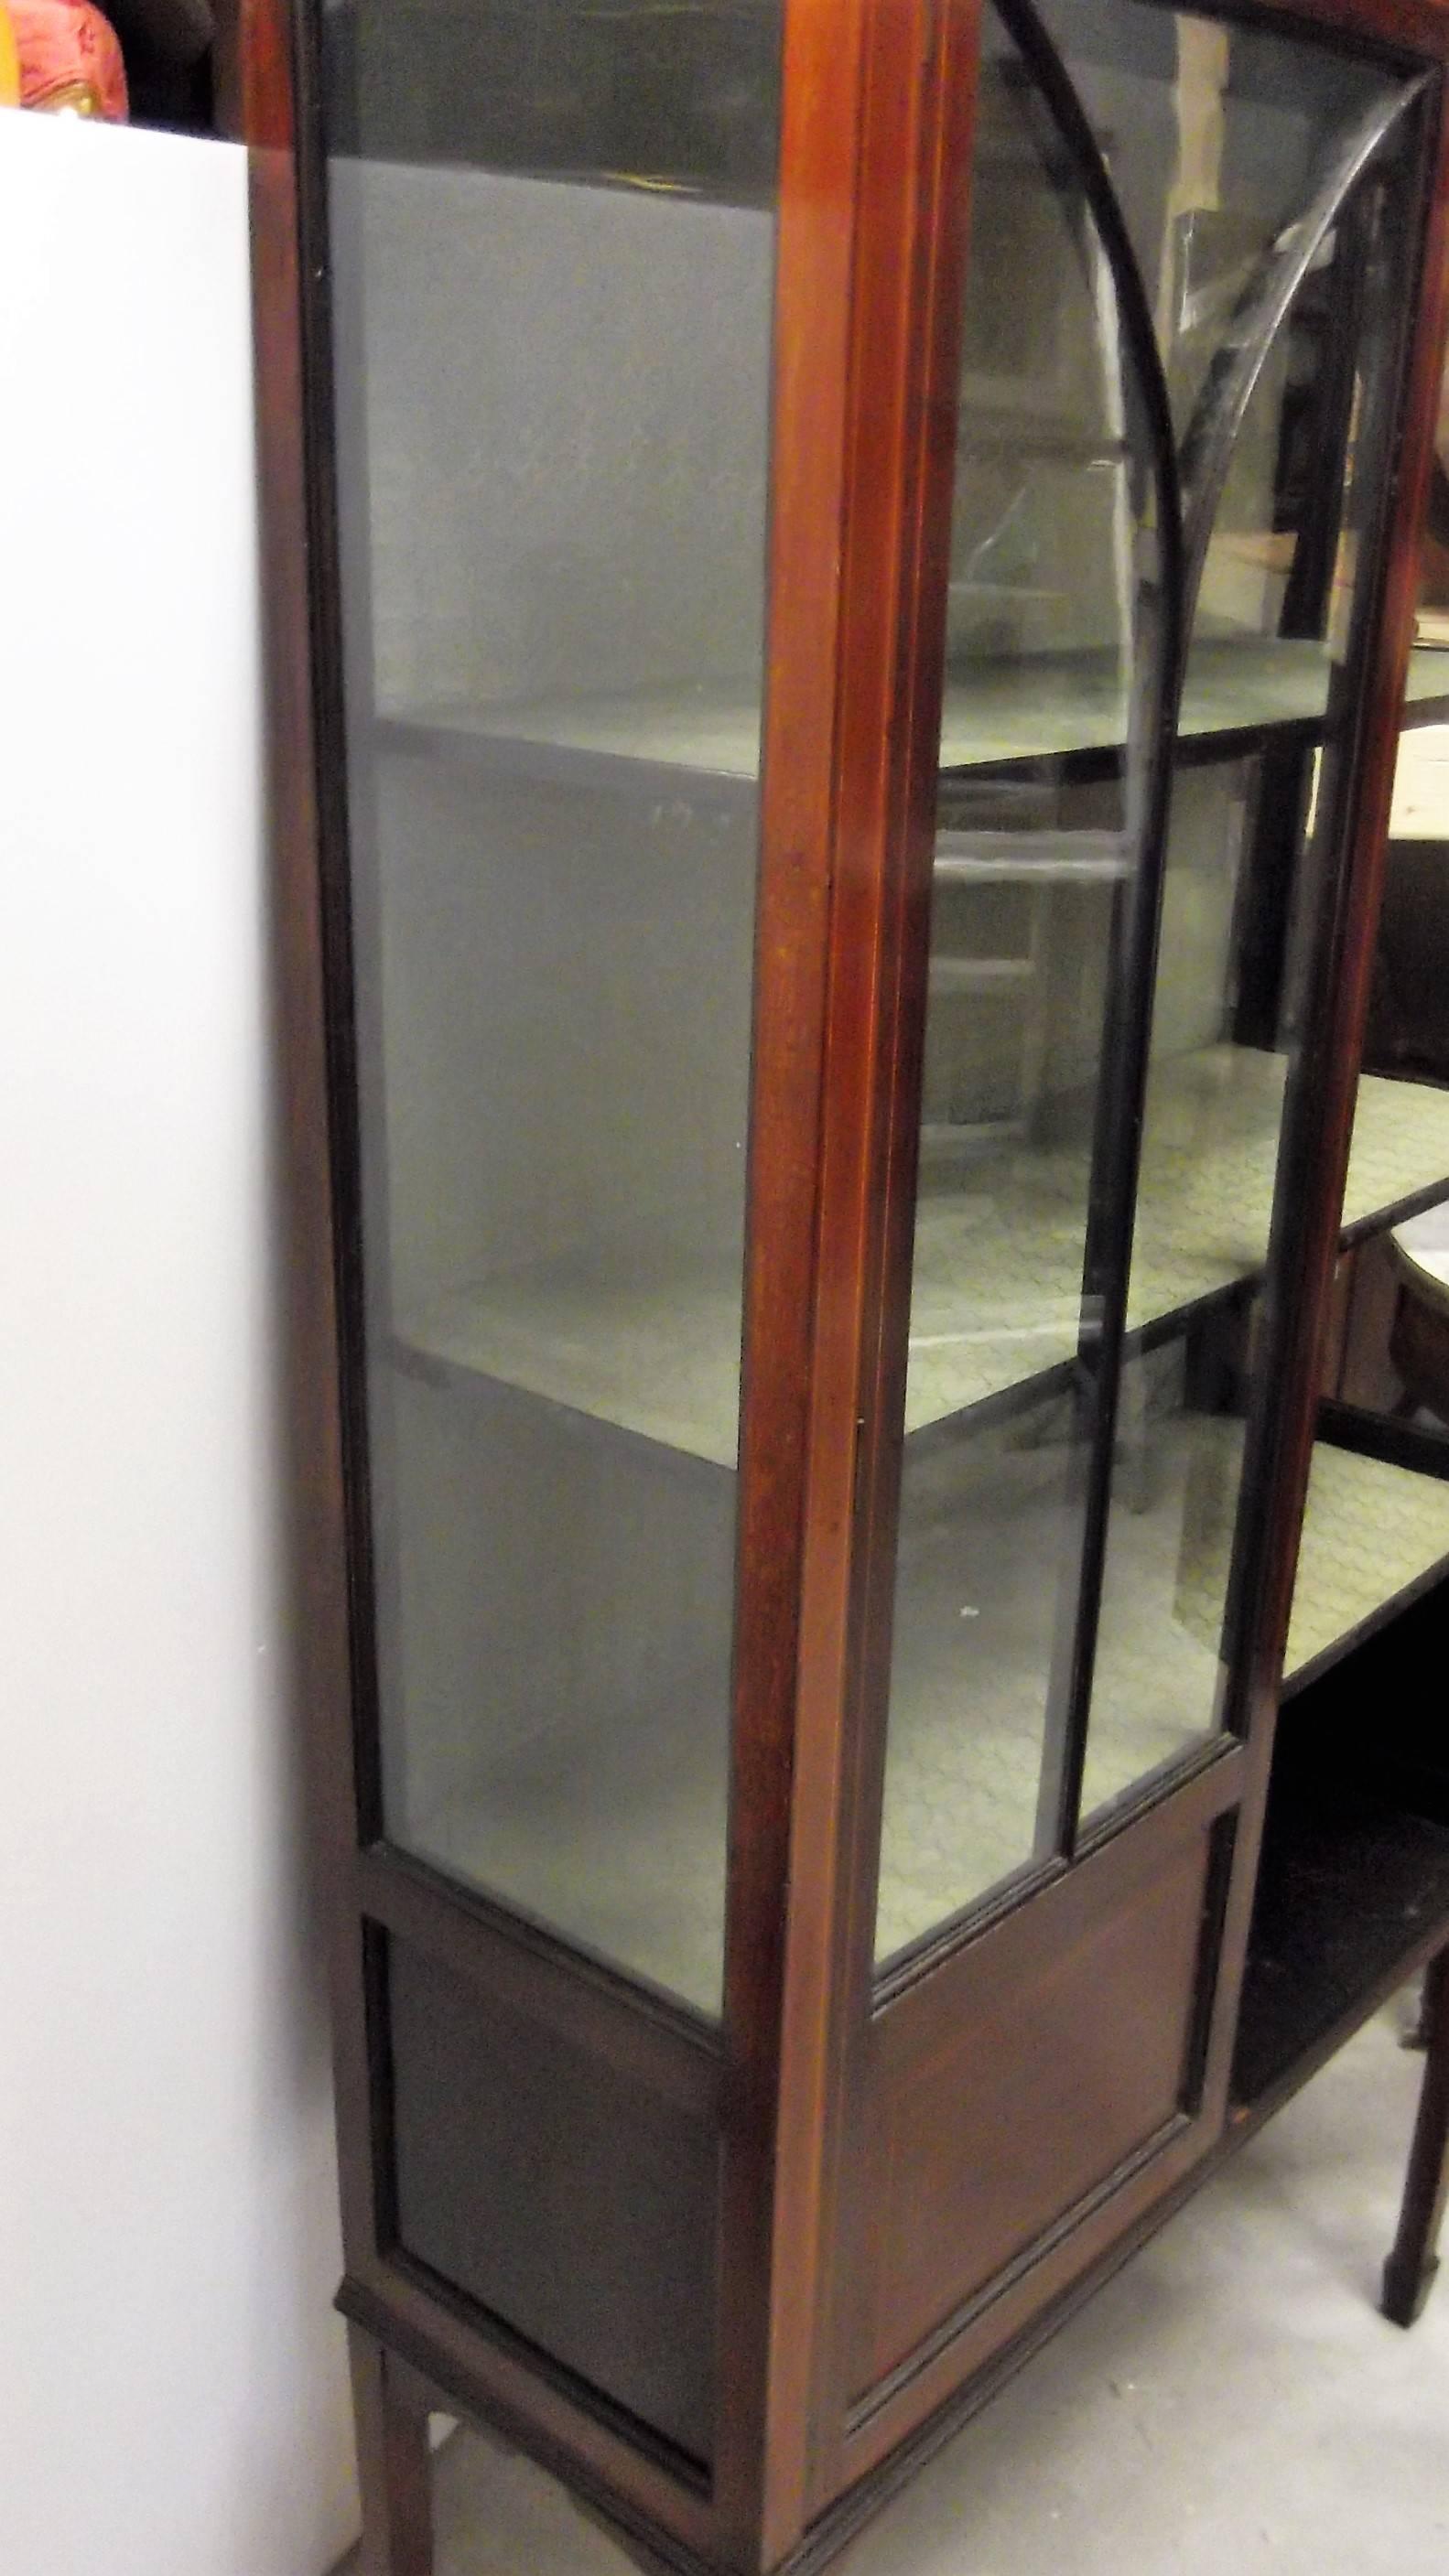 A mahogany with satinwood pencil inlay display case cabinet. The overhanging top above two individually glass pained doors resting on four tapered legs The interior has two shelves, the lower section had wood panels for closed storage. The lock